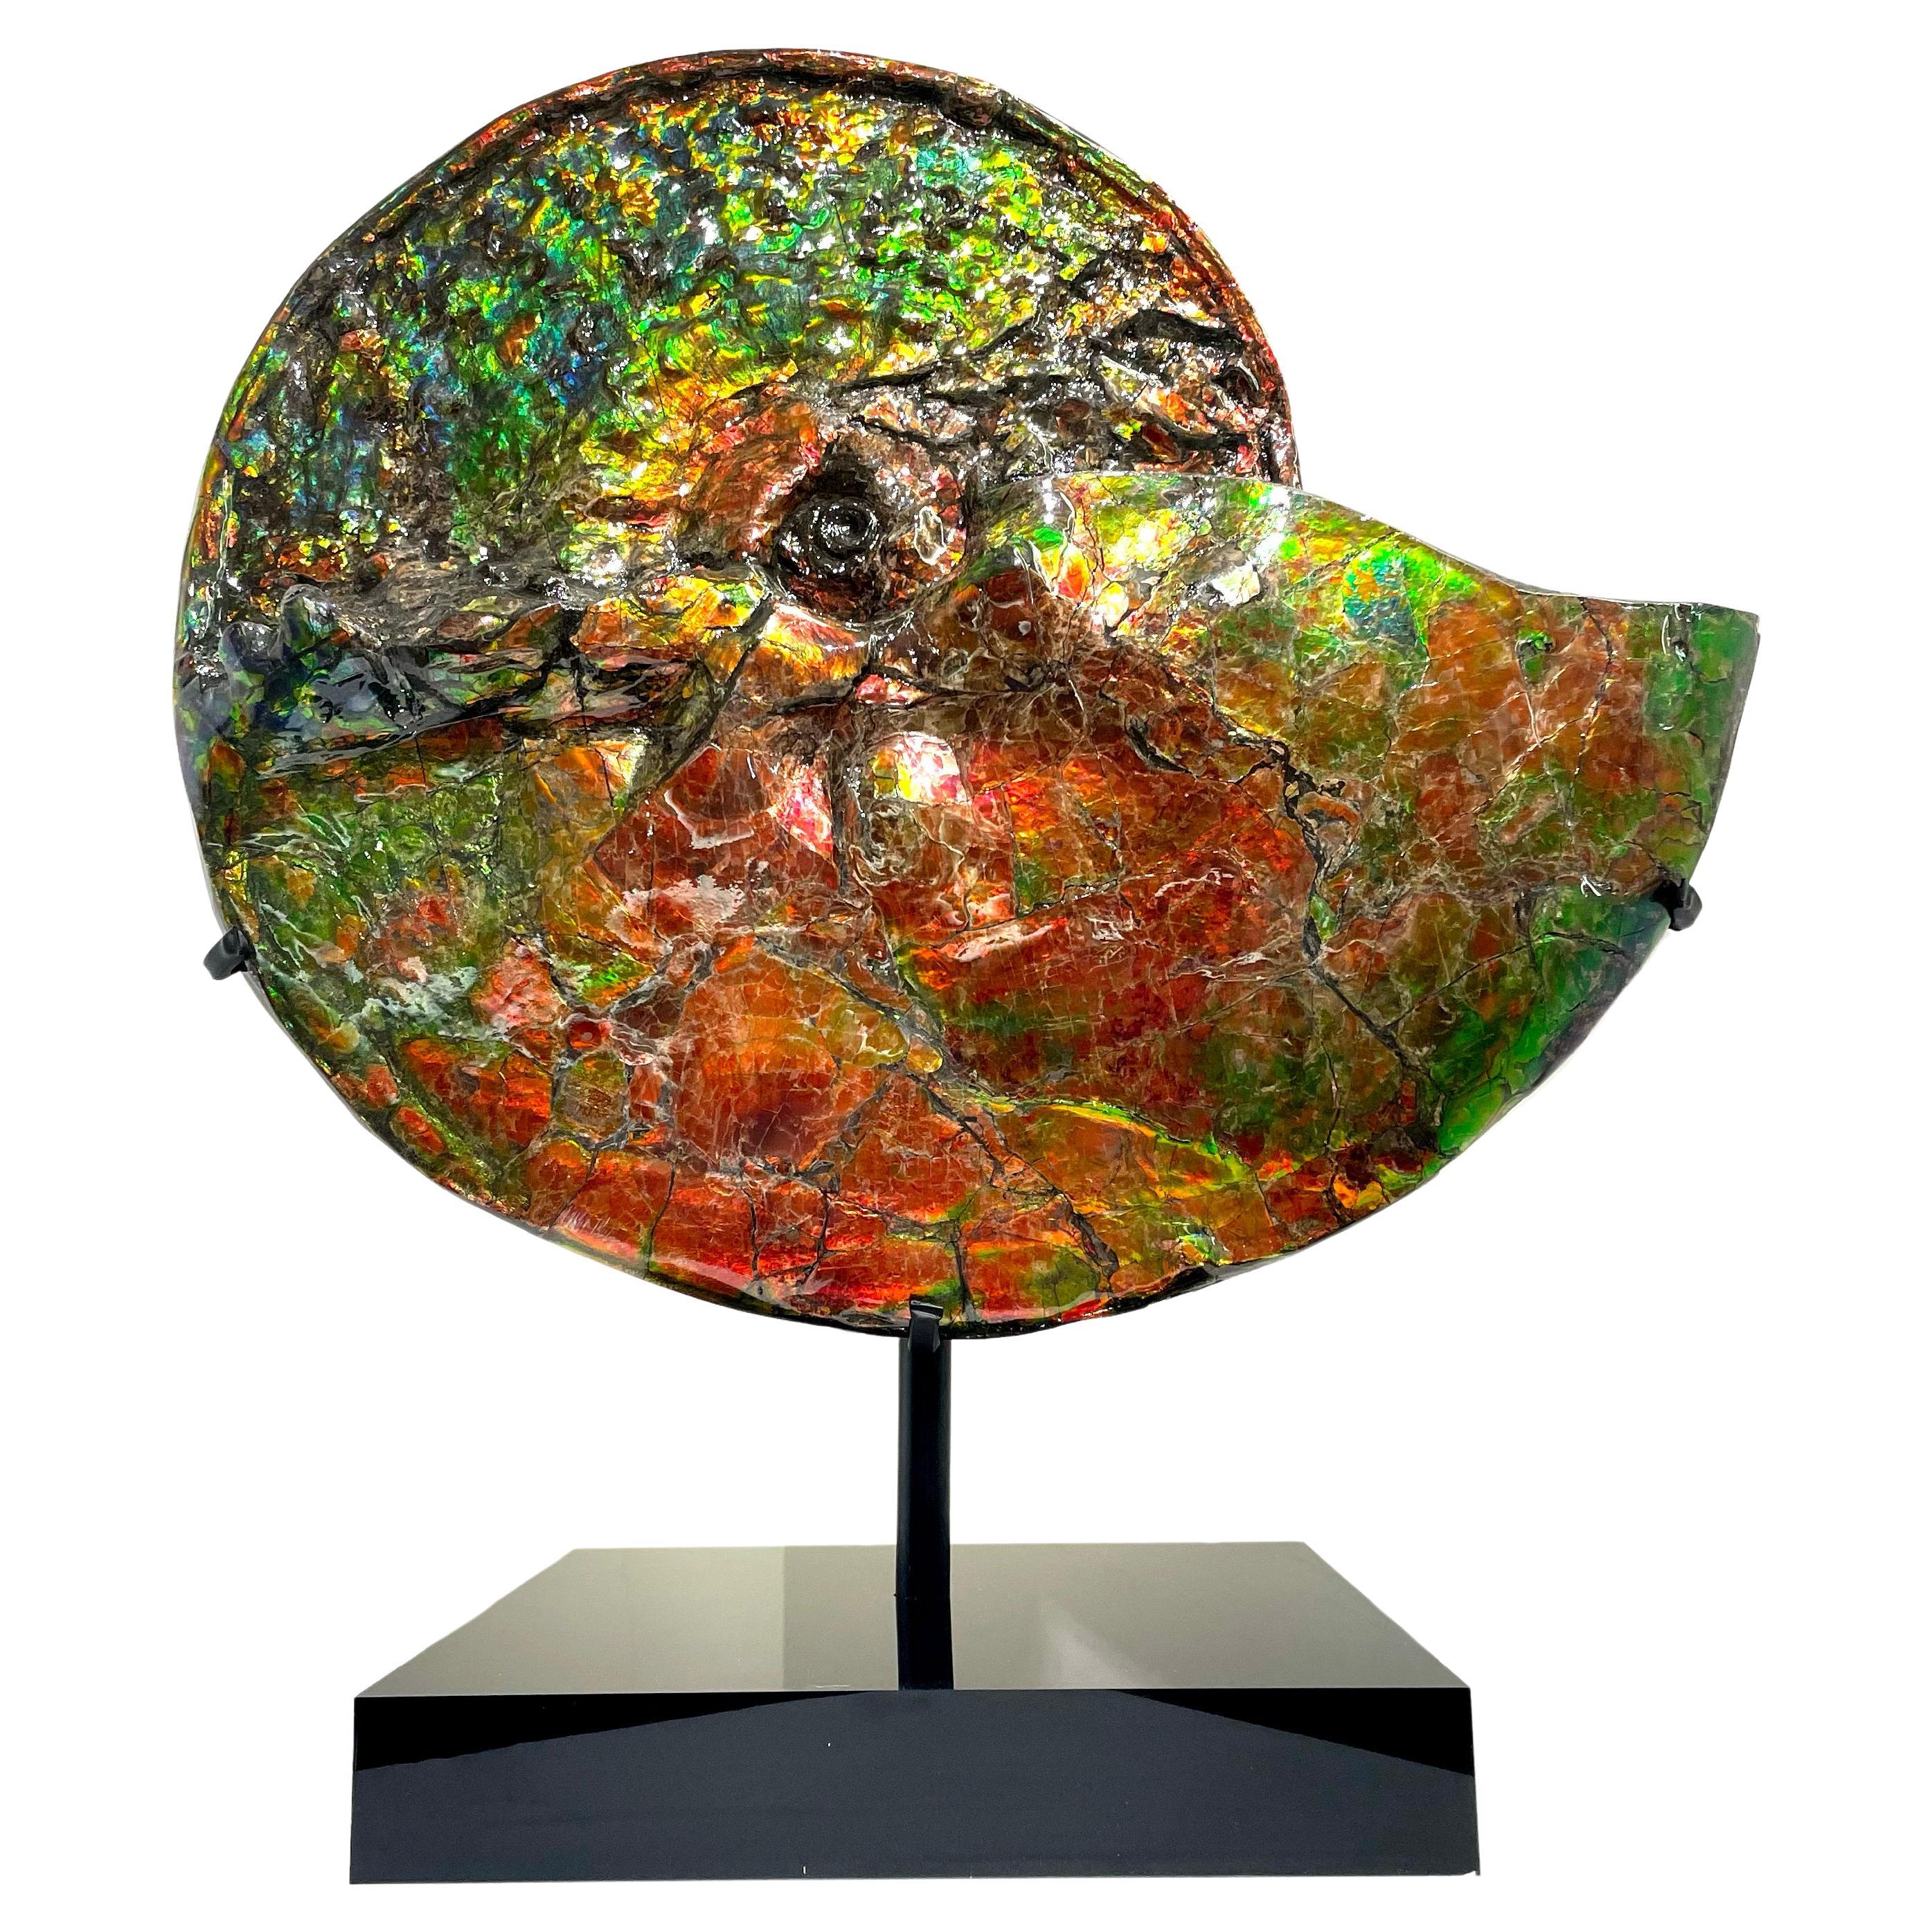 Rare Iridescent Ammonite

'Placenticeras intercalare'
Upper Cretaceous (75-72 million years ago)
Measures: 41 x 48 x 4 cm
Alberta, Canada 

Known as ‘Ammolite’, the shimmering, metallic colours were caused by the combination of millions of